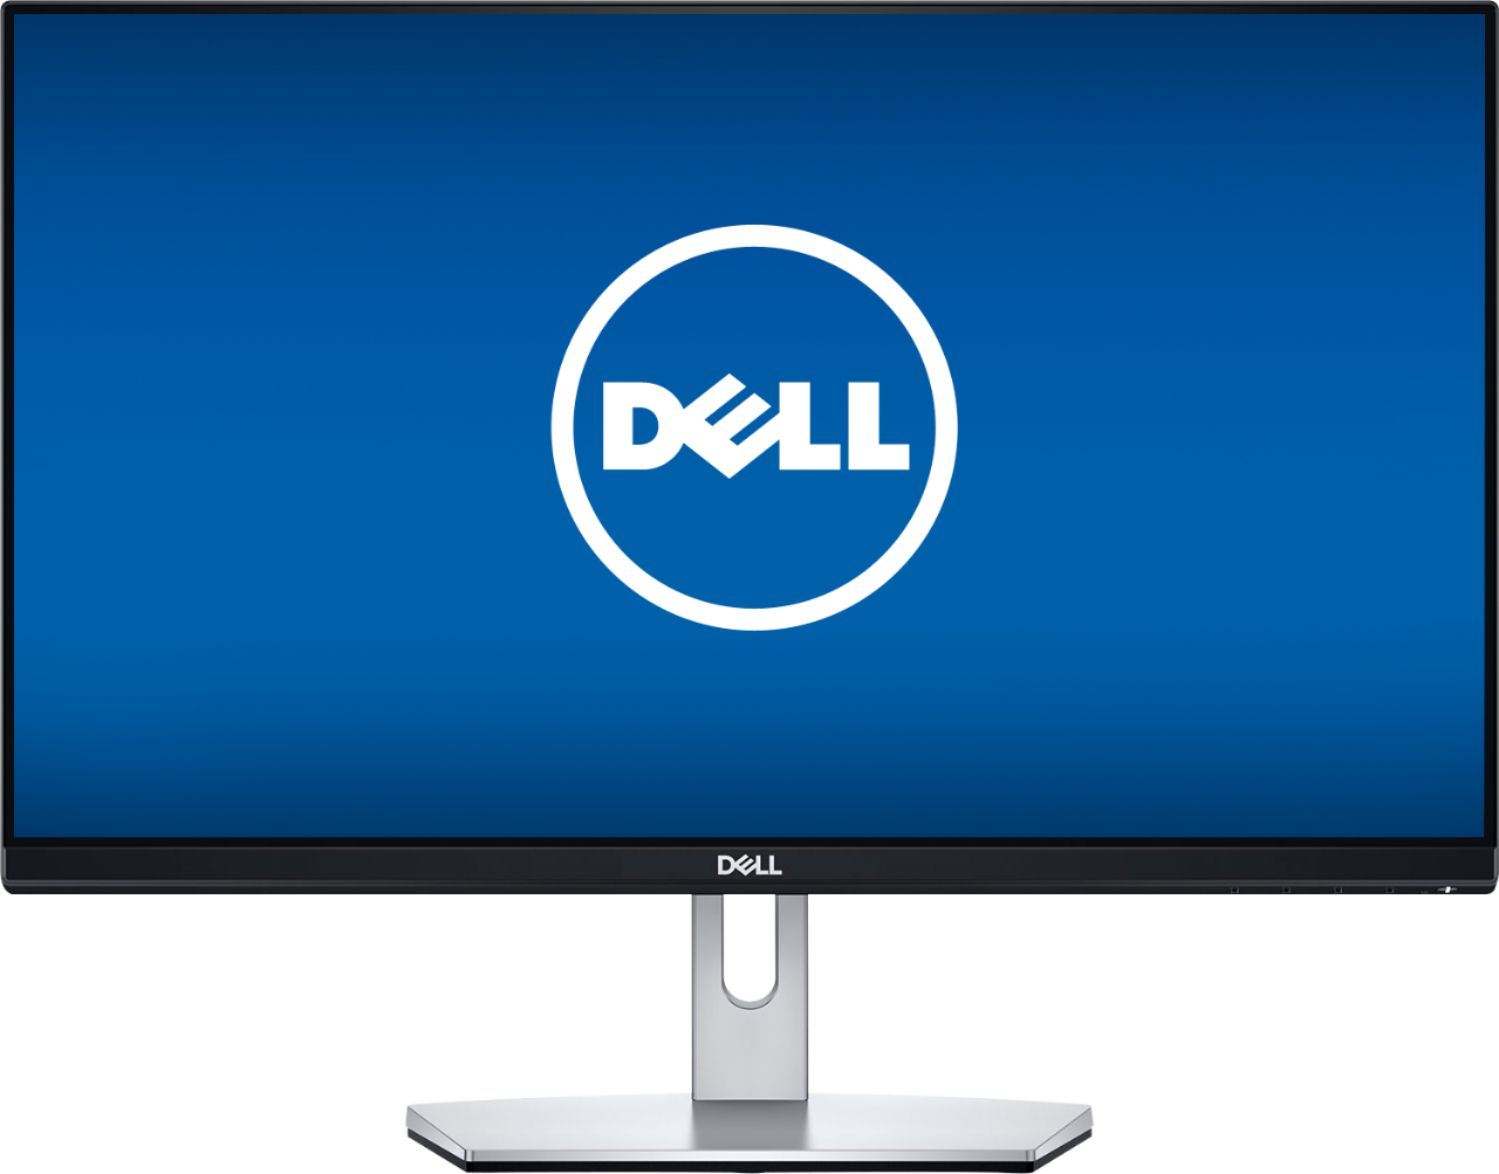 Dell - S2319NX 23" IPS LED FHD Monitor - Black/Silver ...